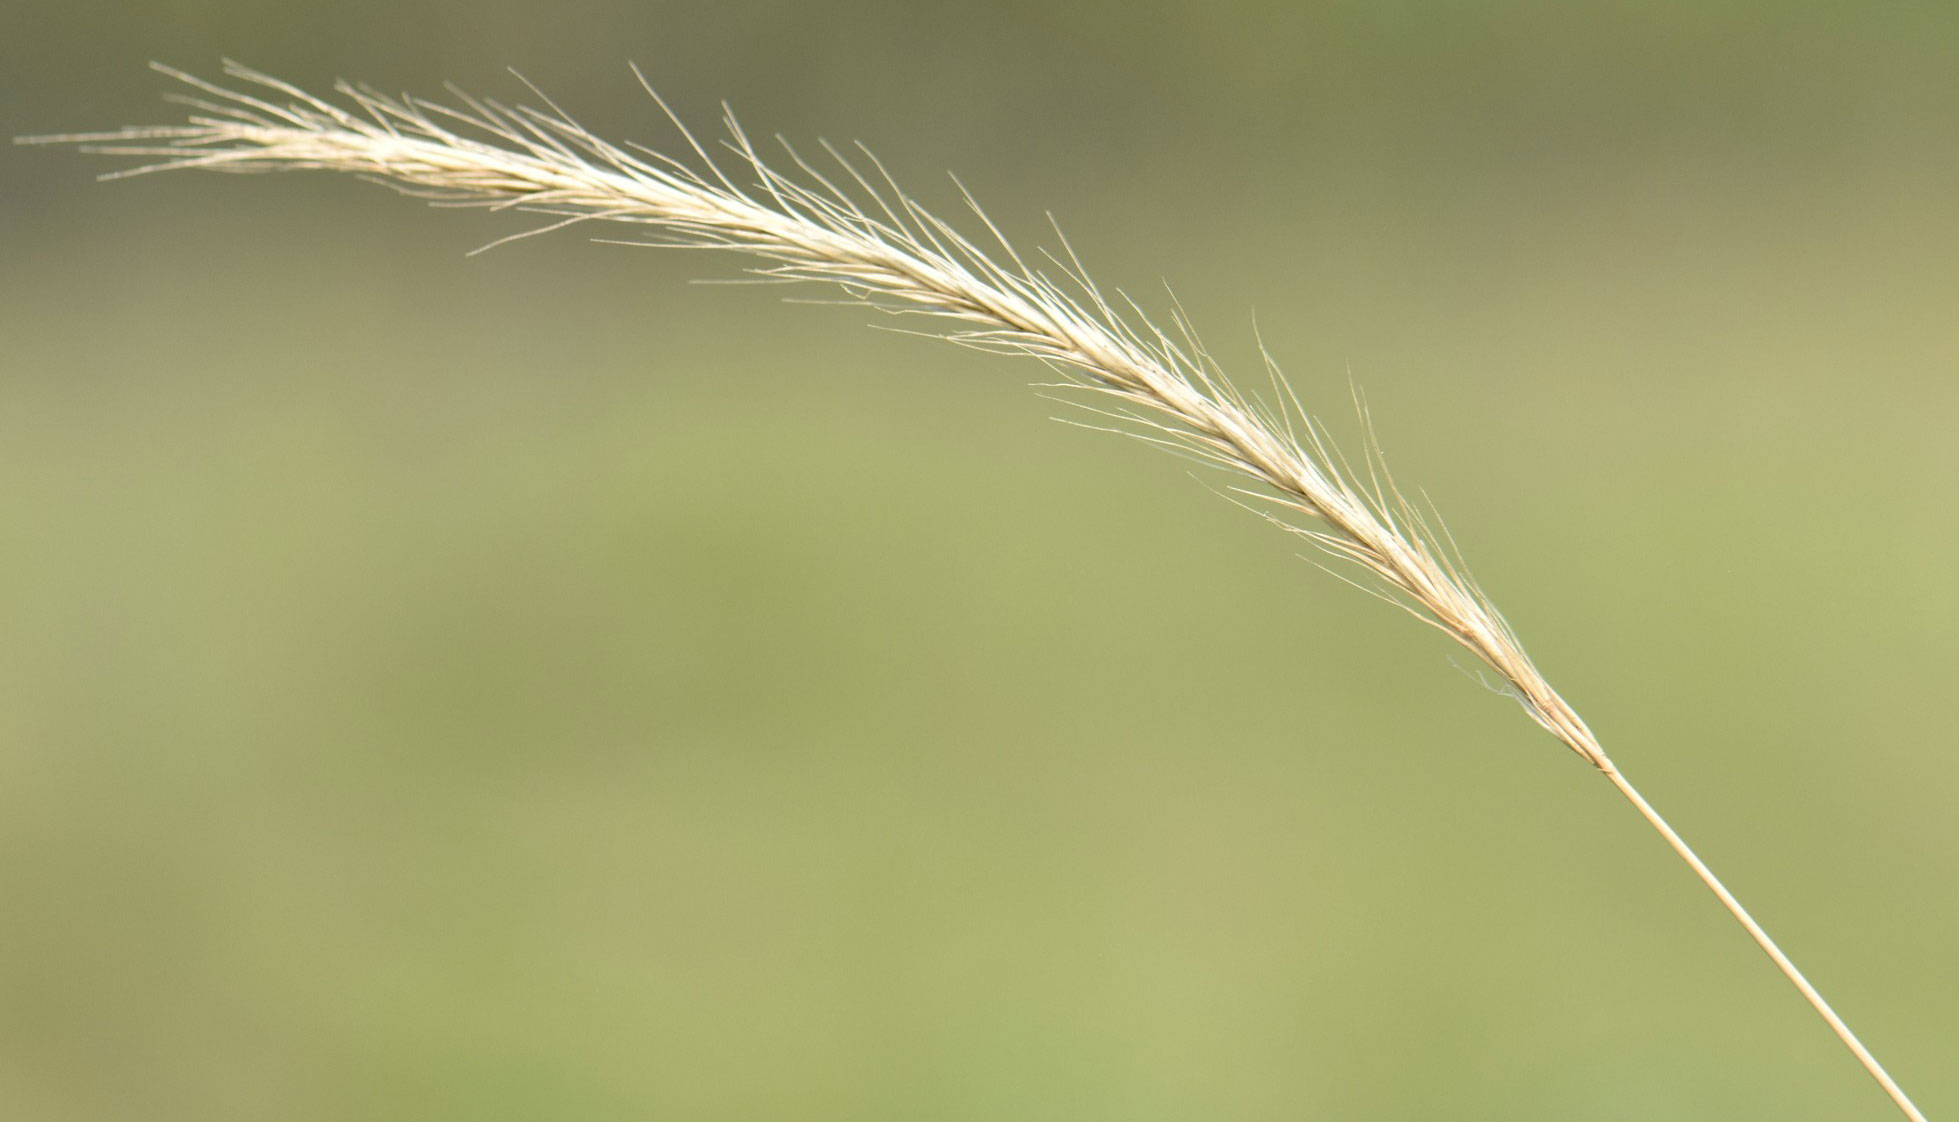 Photograph of the inflorescence of Macoun's barley, a hybrid between species in different genera. The photo shows a thin, light yellow inflorescence with a feathery appearance.